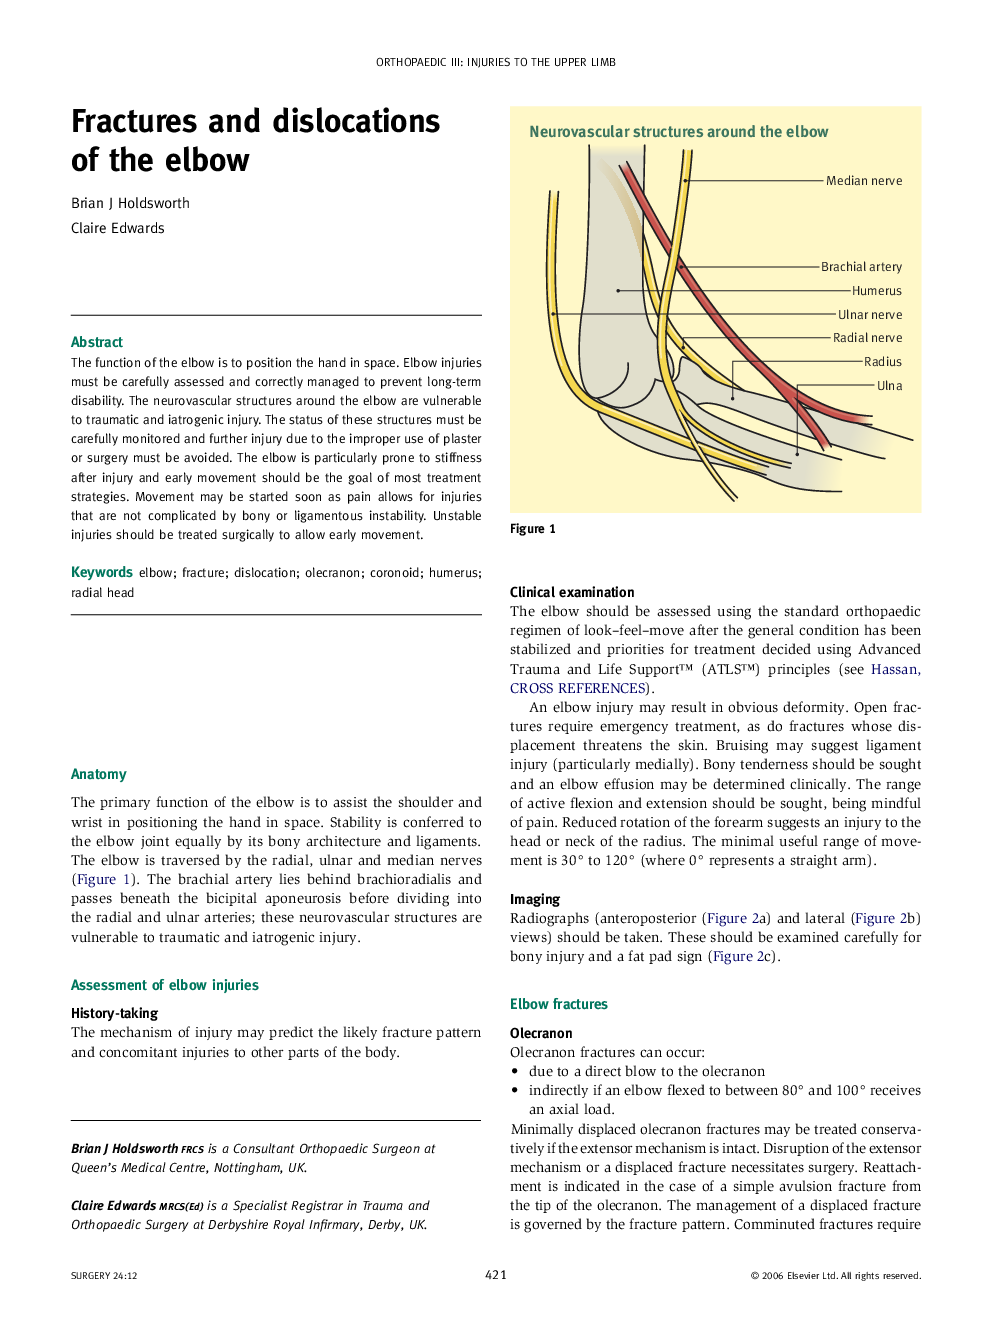 Fractures and dislocations of the elbow